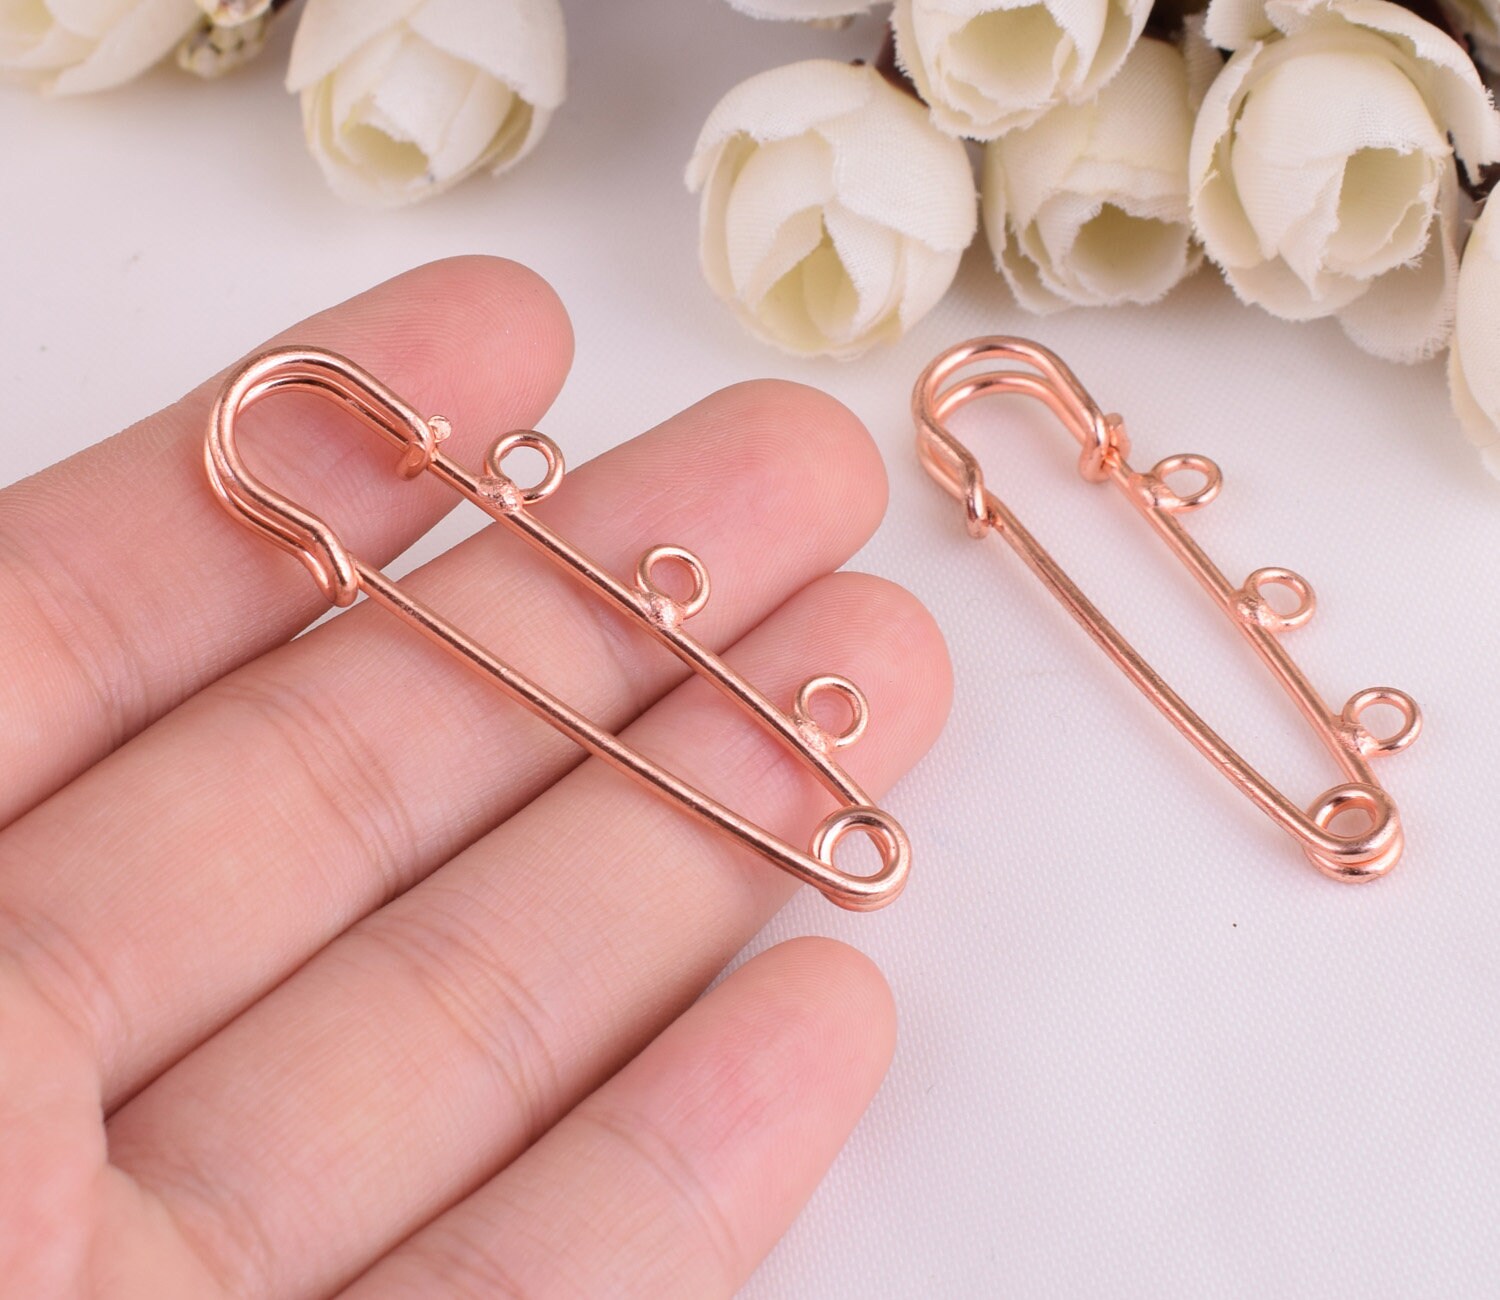 21mm-55mm Safety Pins MINI Rose Gold Safety Pins Jewelry Necklace Brooch  Gourd Shape Safety Pins Assorted 50 Pcs 